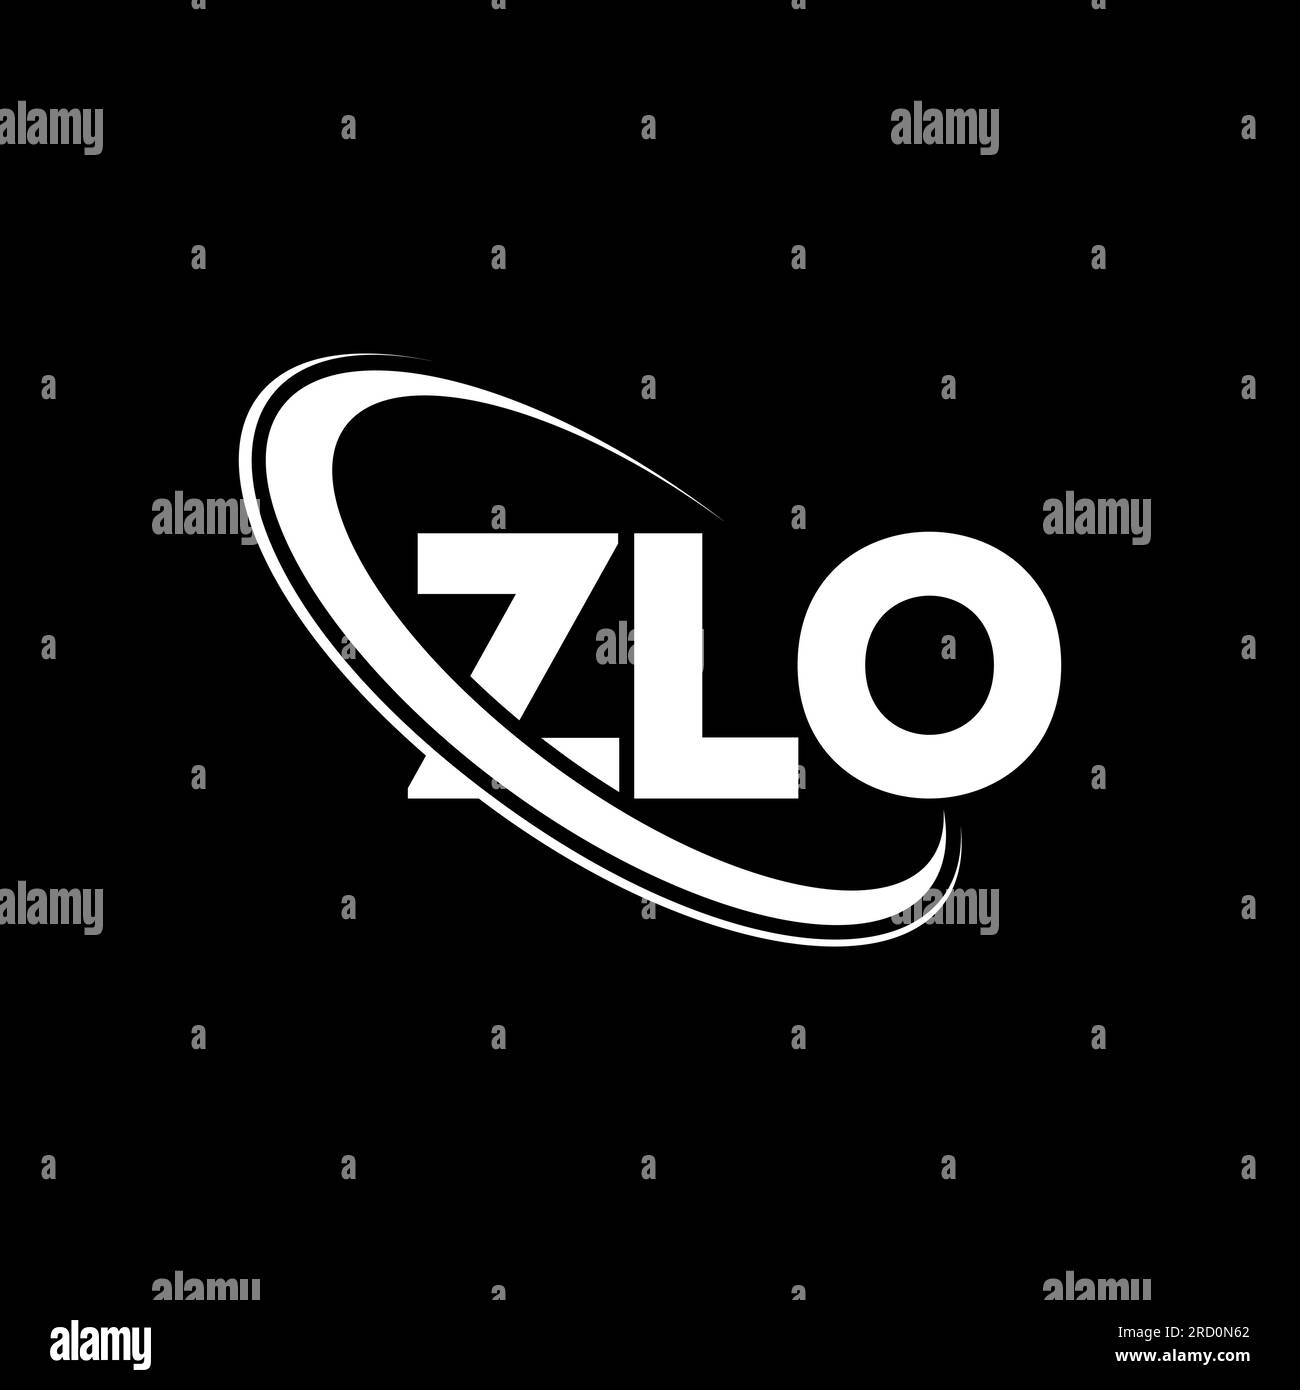 ZLO logo. ZLO letter. ZLO letter logo design. Initials ZLO logo linked with circle and uppercase monogram logo. ZLO typography for technology, busines Stock Vector